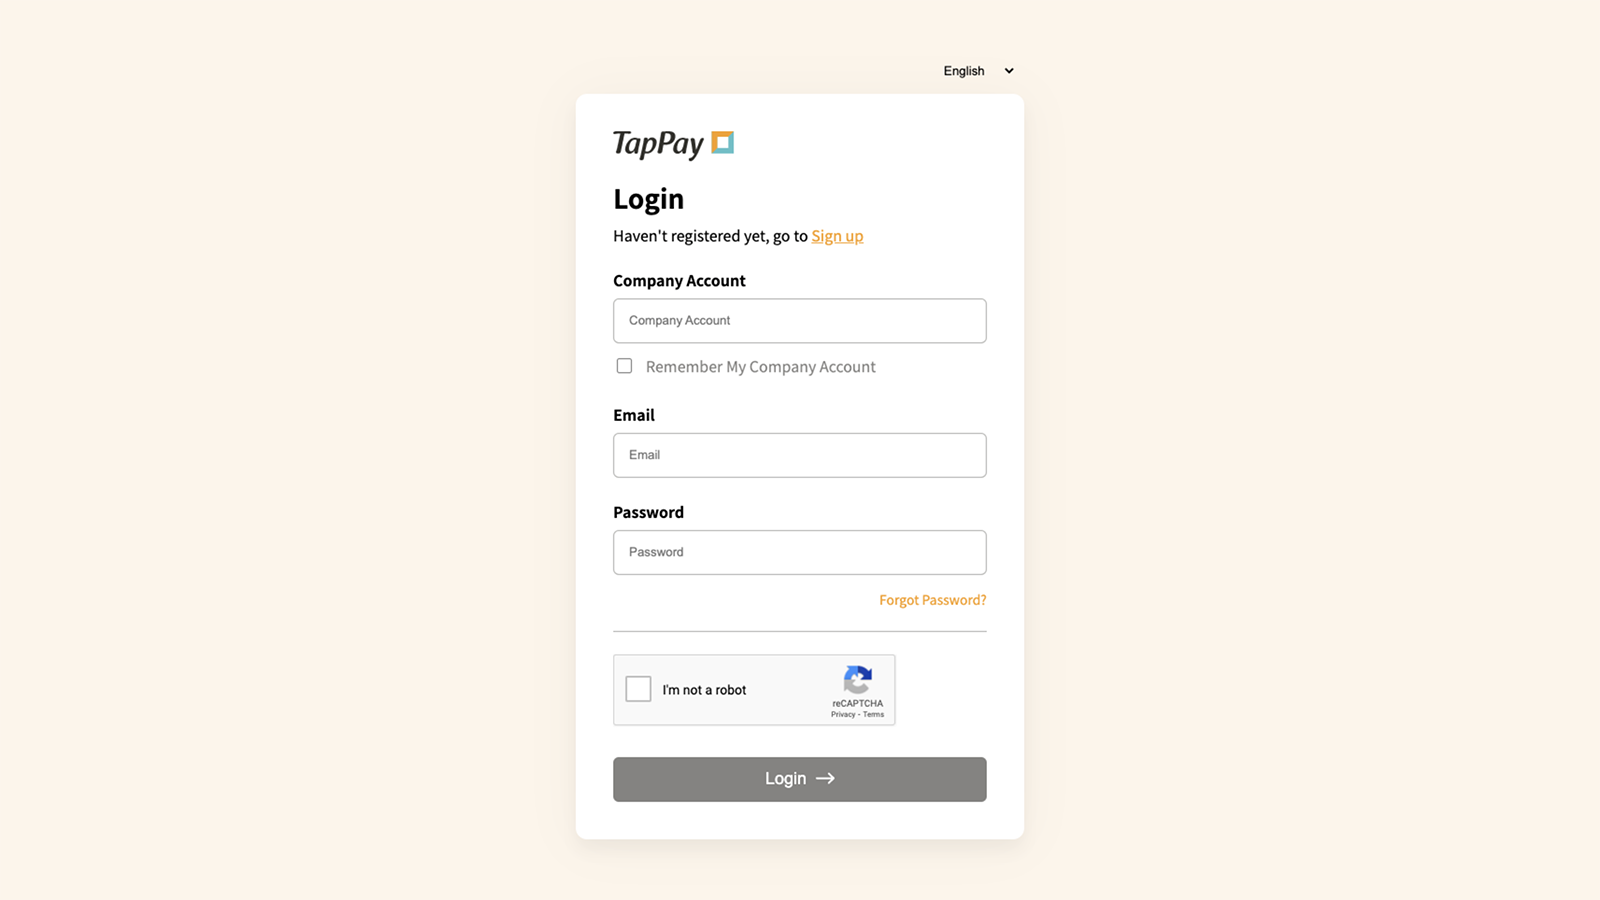 TapPay Portal login for installing LINE Pay 2